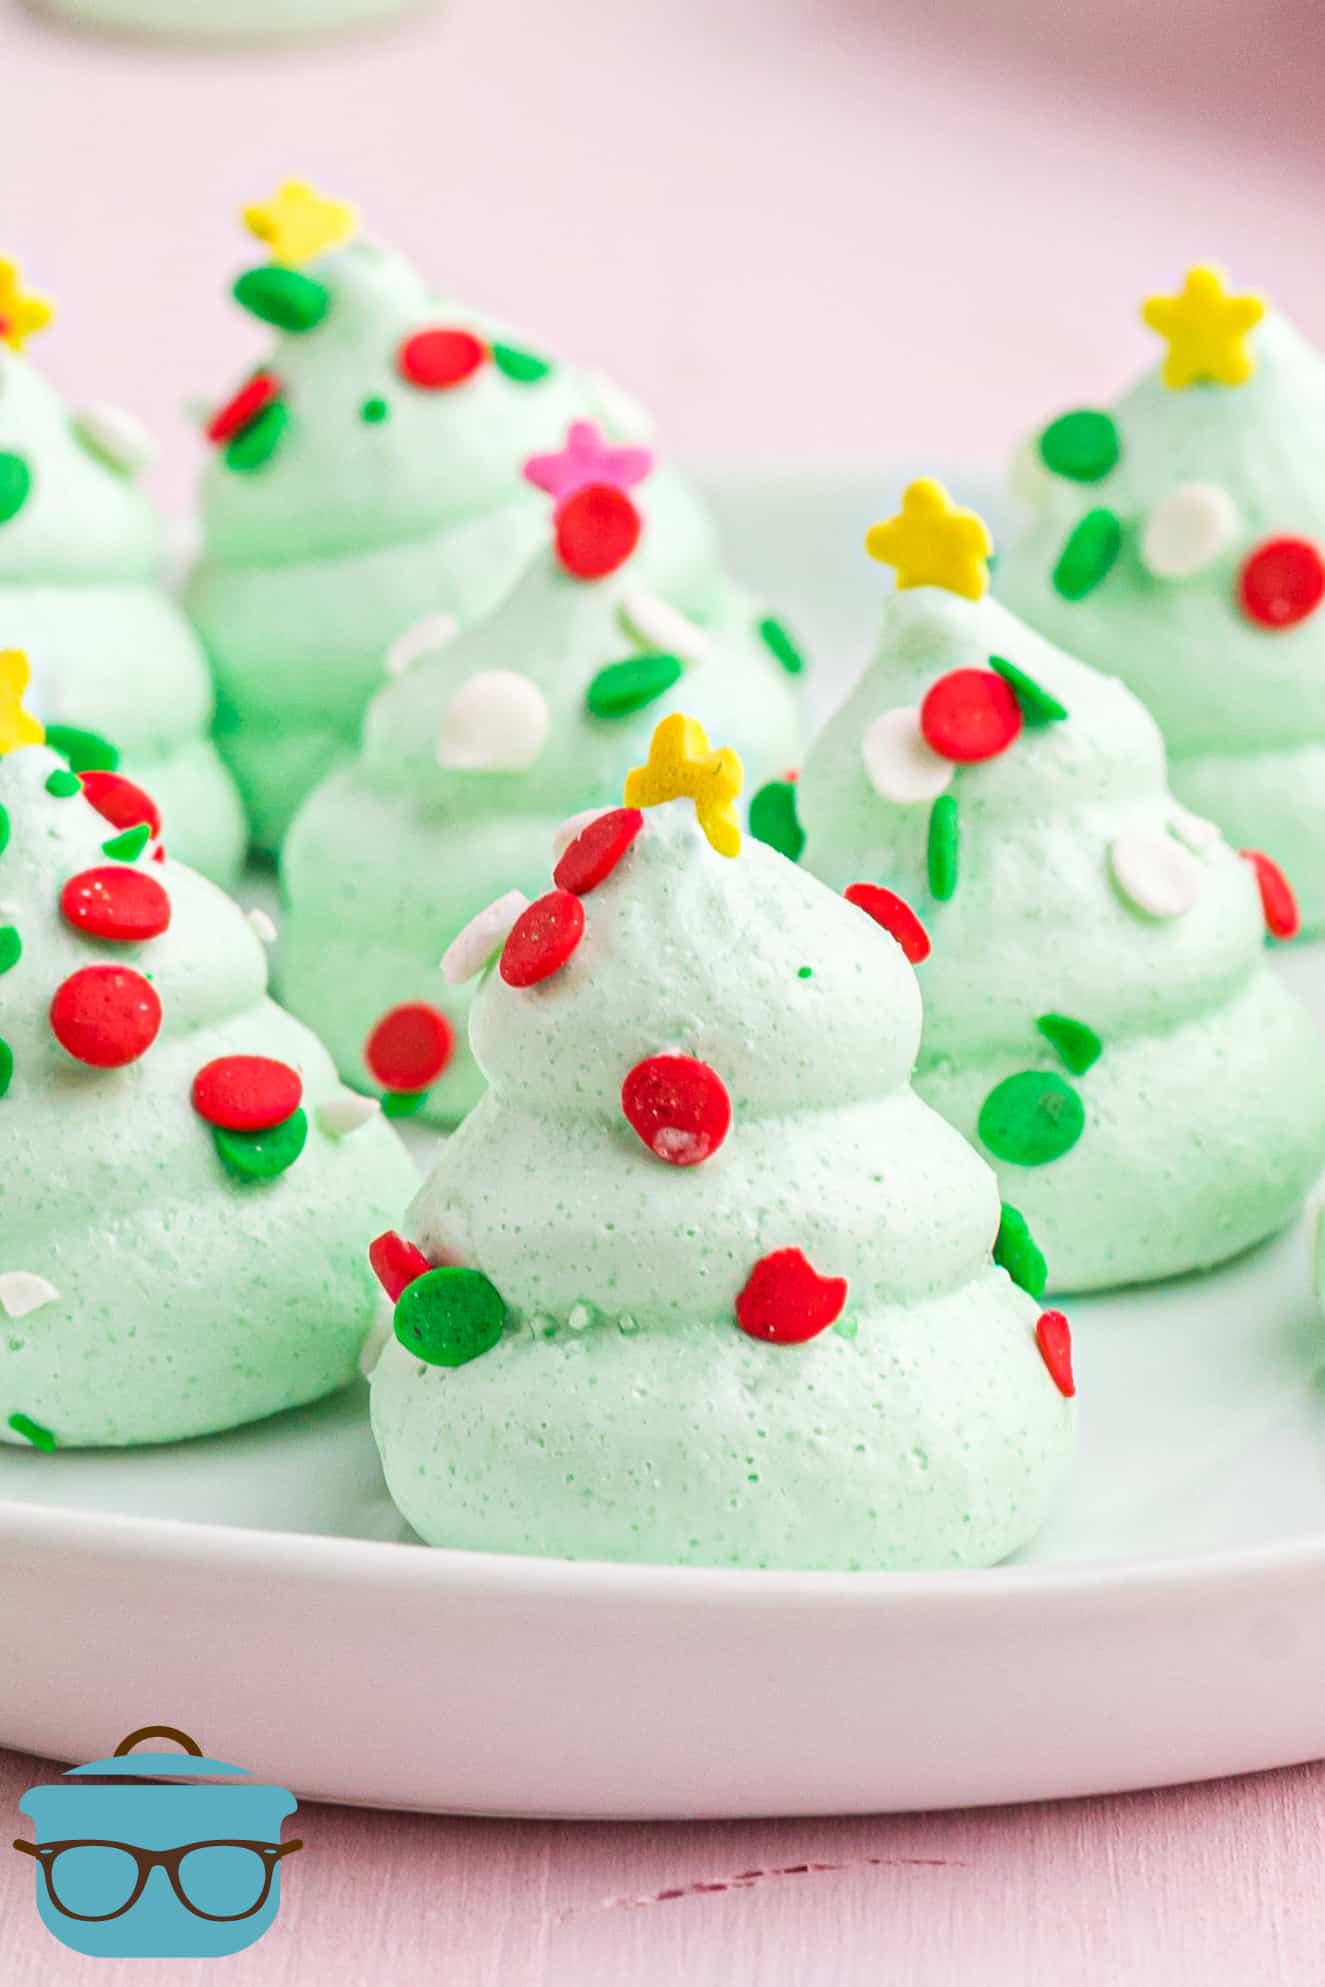 green Christmas tree shaped meringue cookies shown on a small white plate on a pink background.